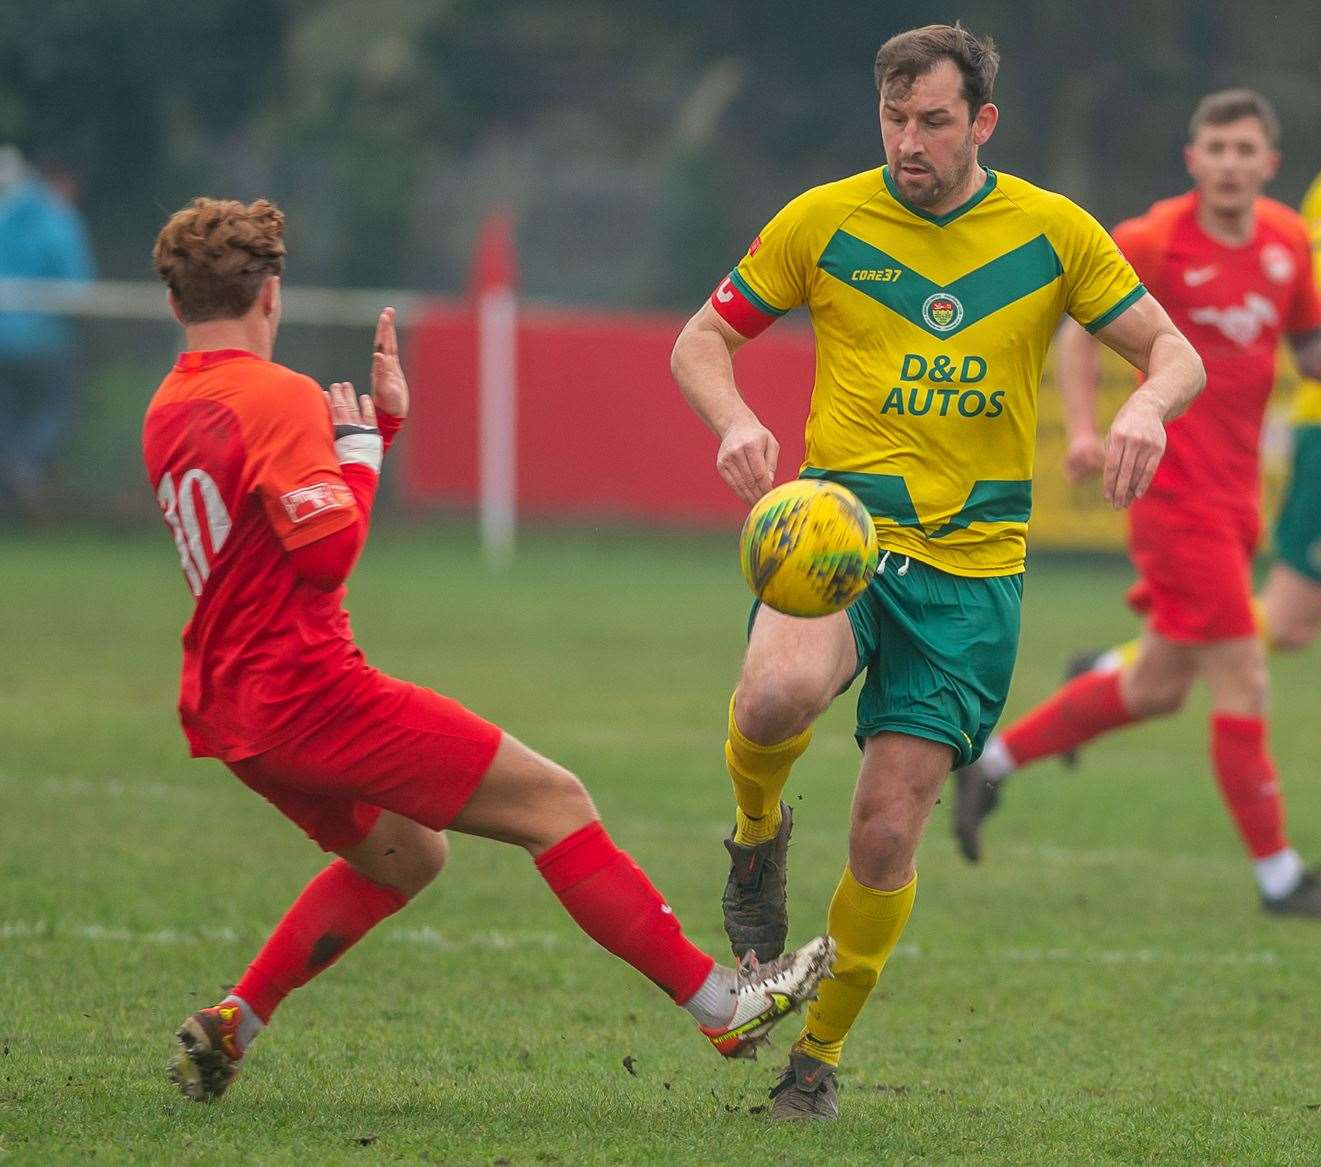 Ashford defender Liam Friend takes charge of the situation Picture: Ashford United